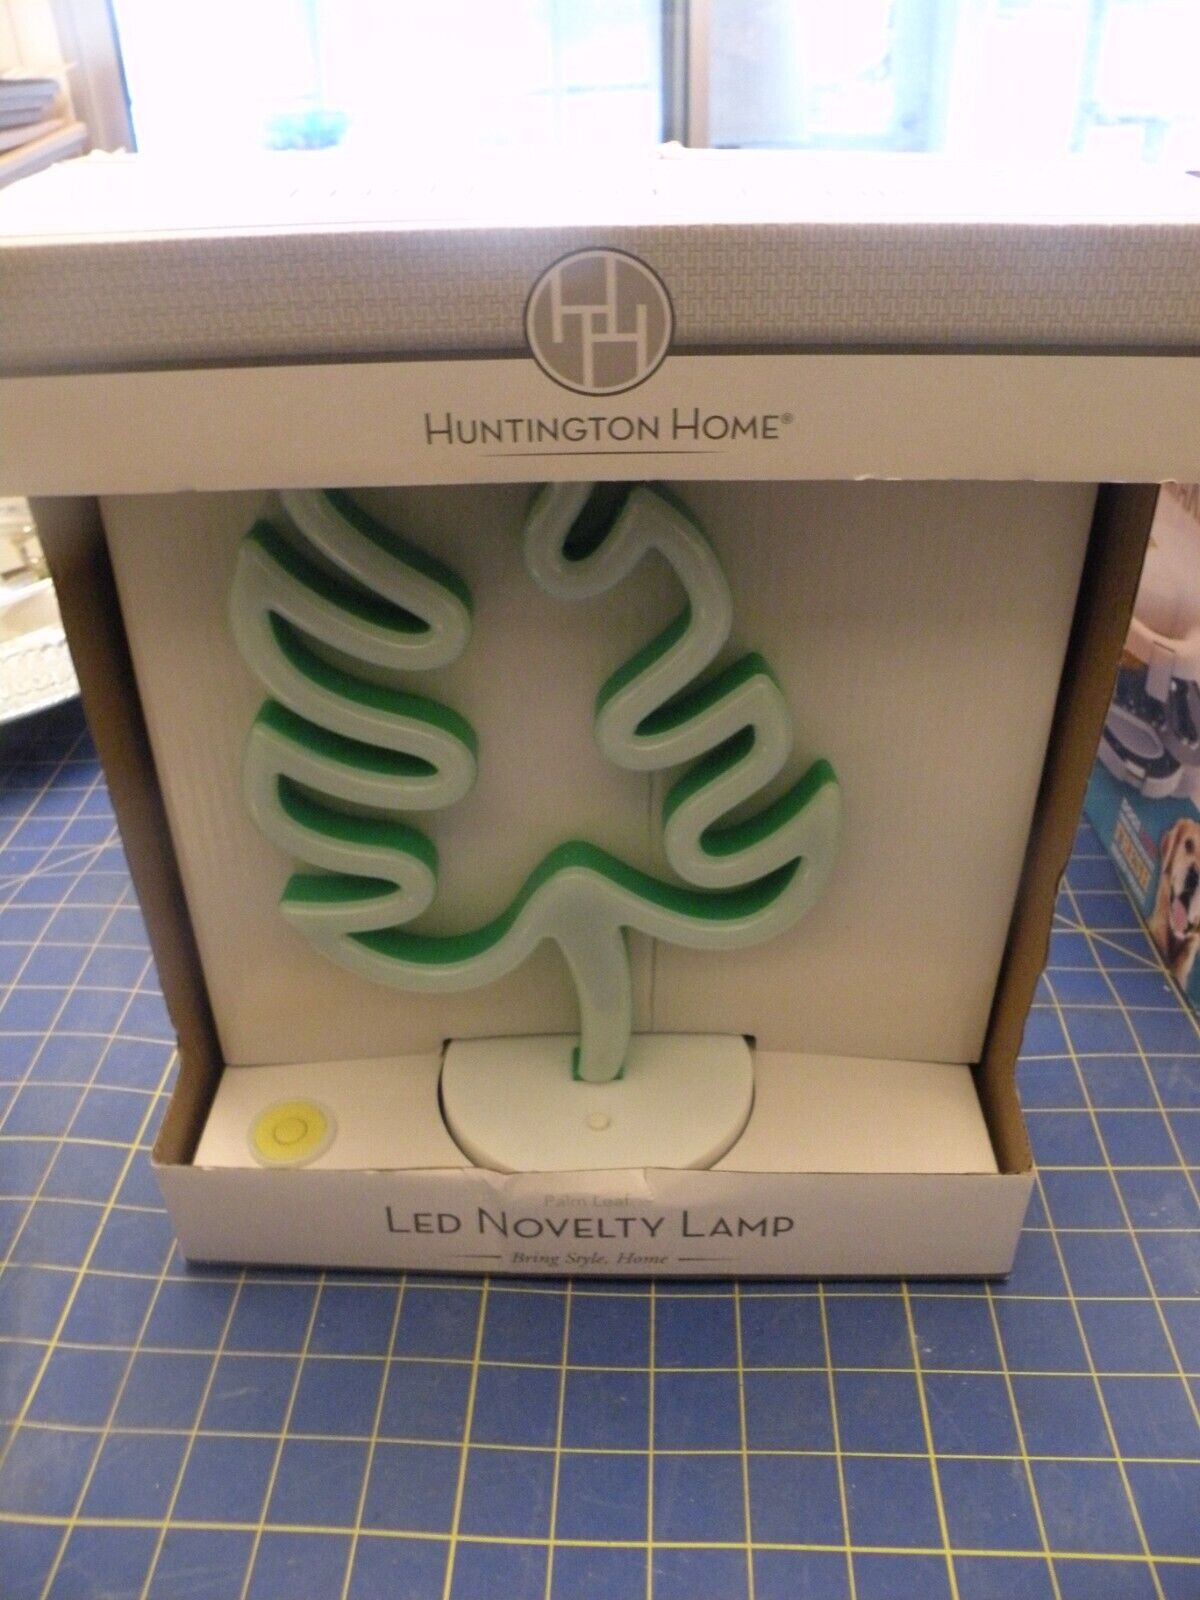 Huntington Home LED Novelty Lamp NEW IN BOX PALM LEAF BUTTON TESTED